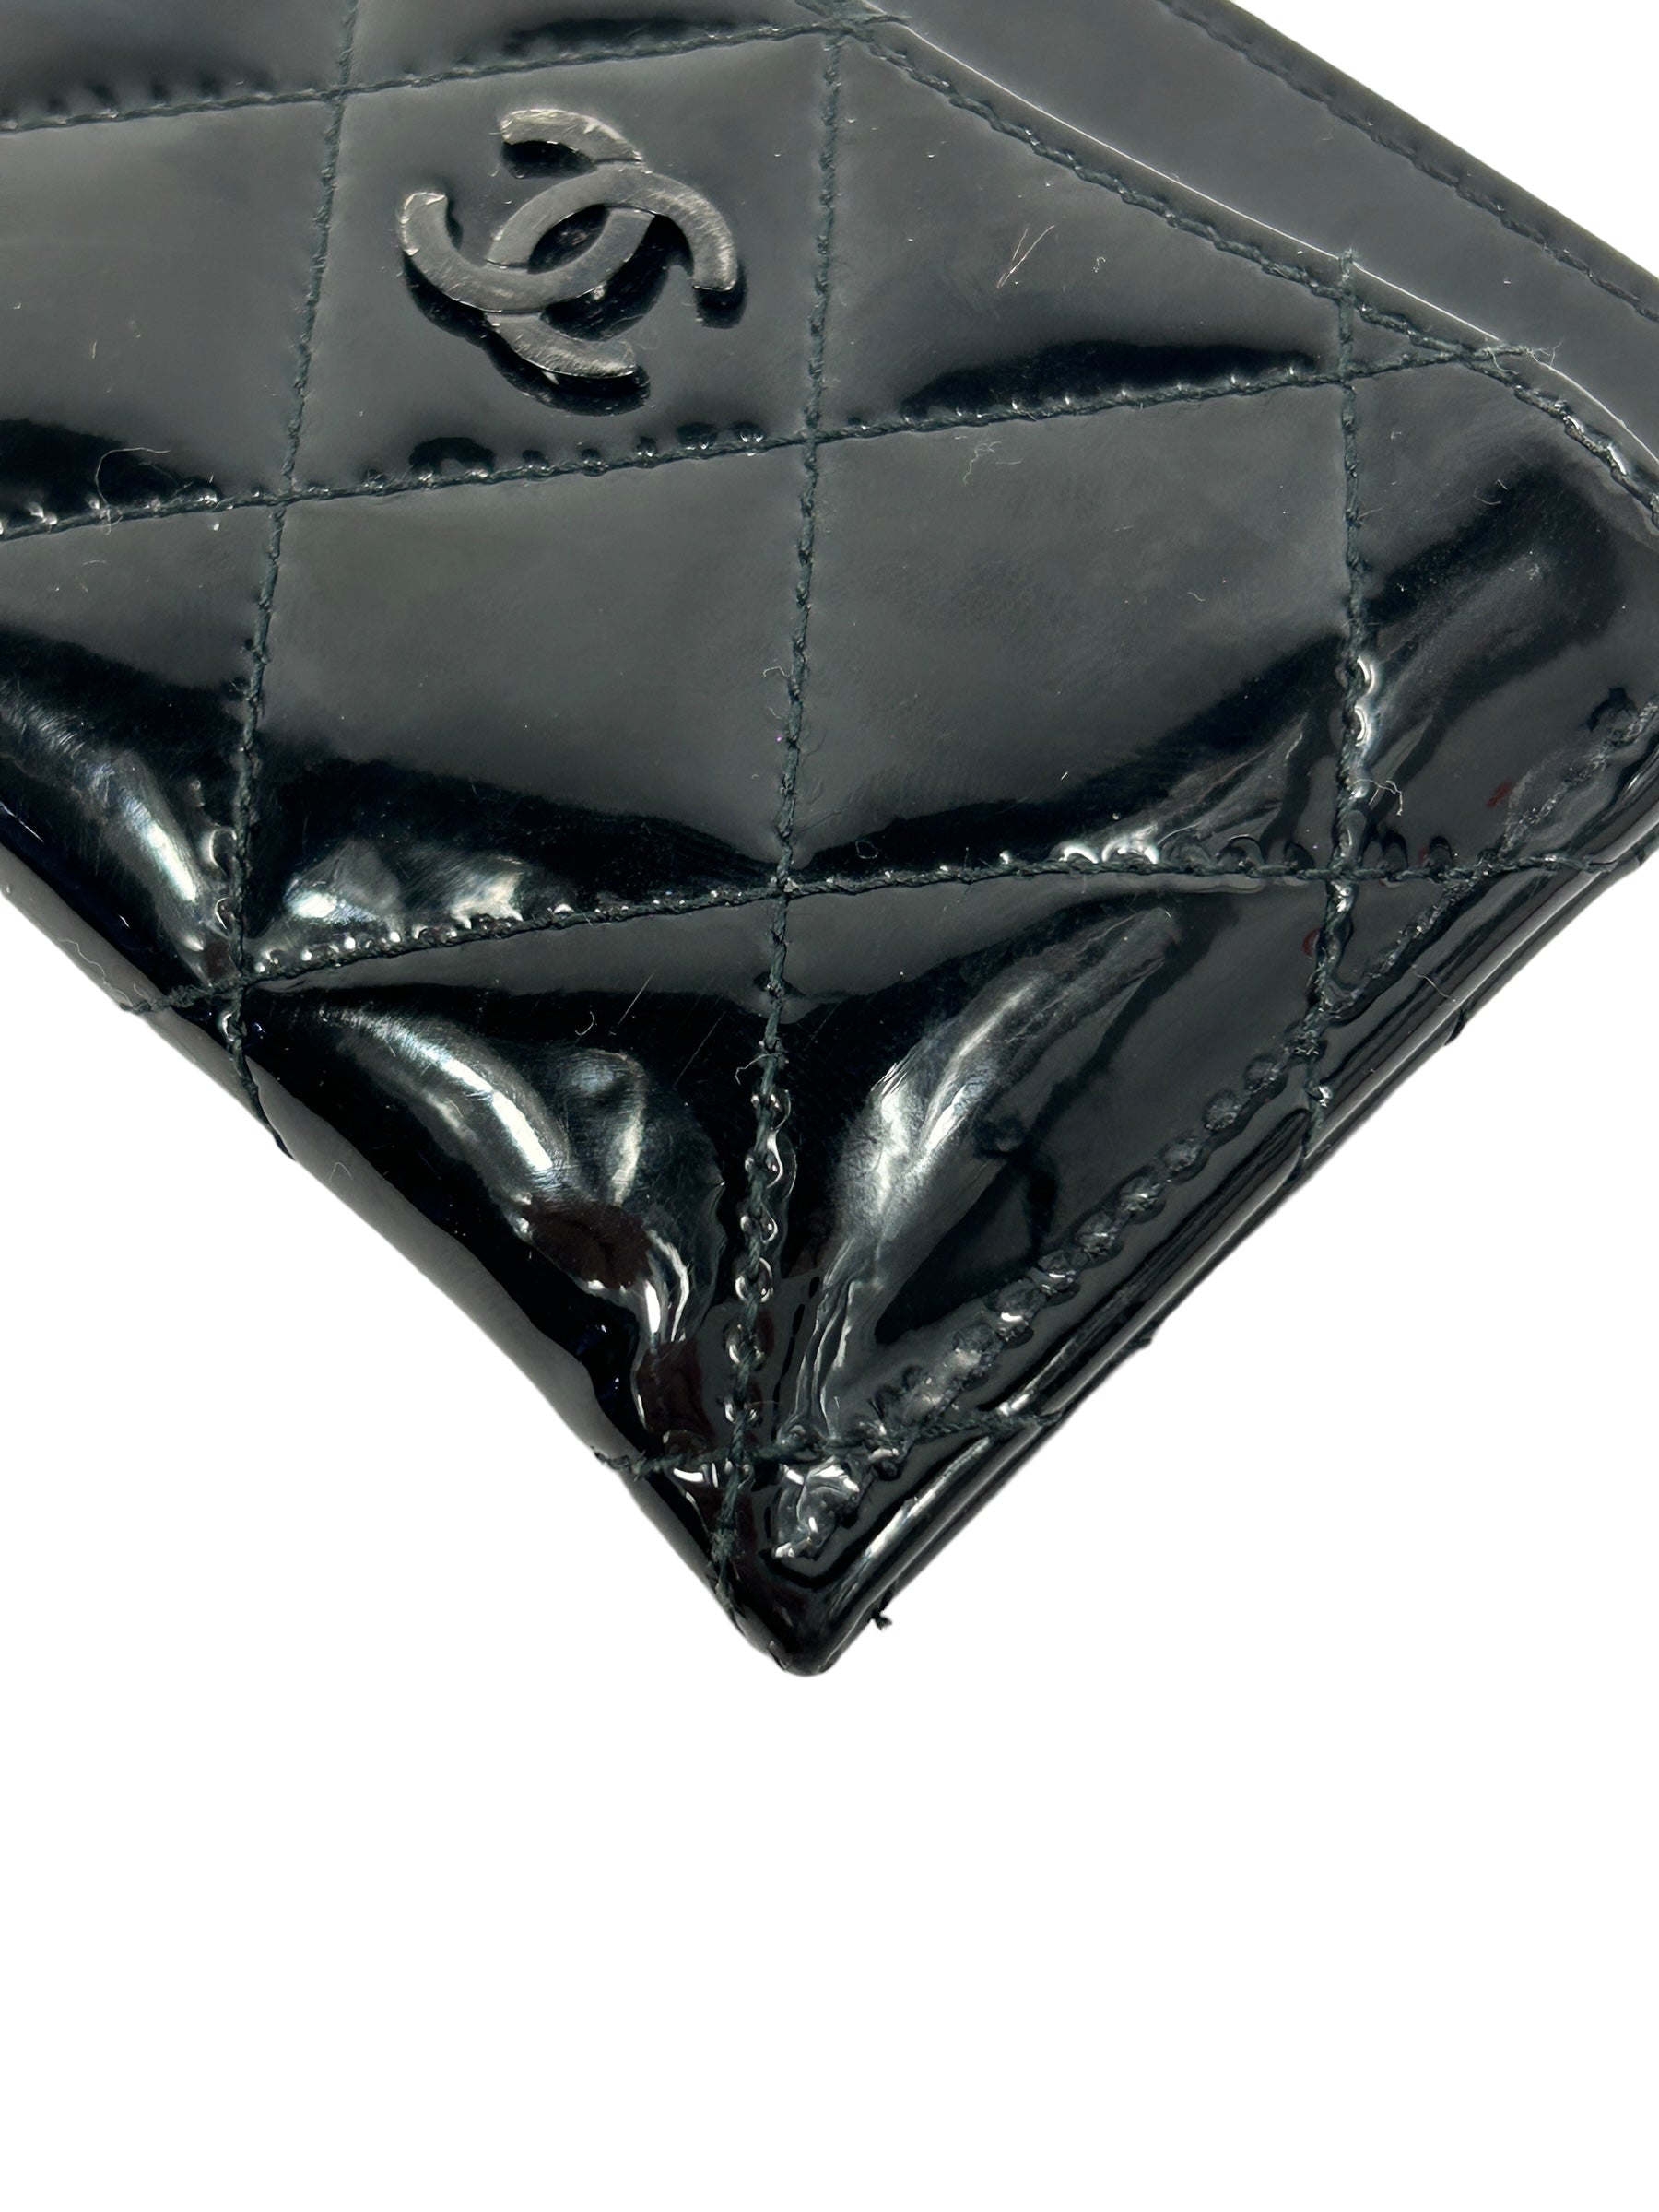 Black Quilted Patent Leather Card Case w/RHW